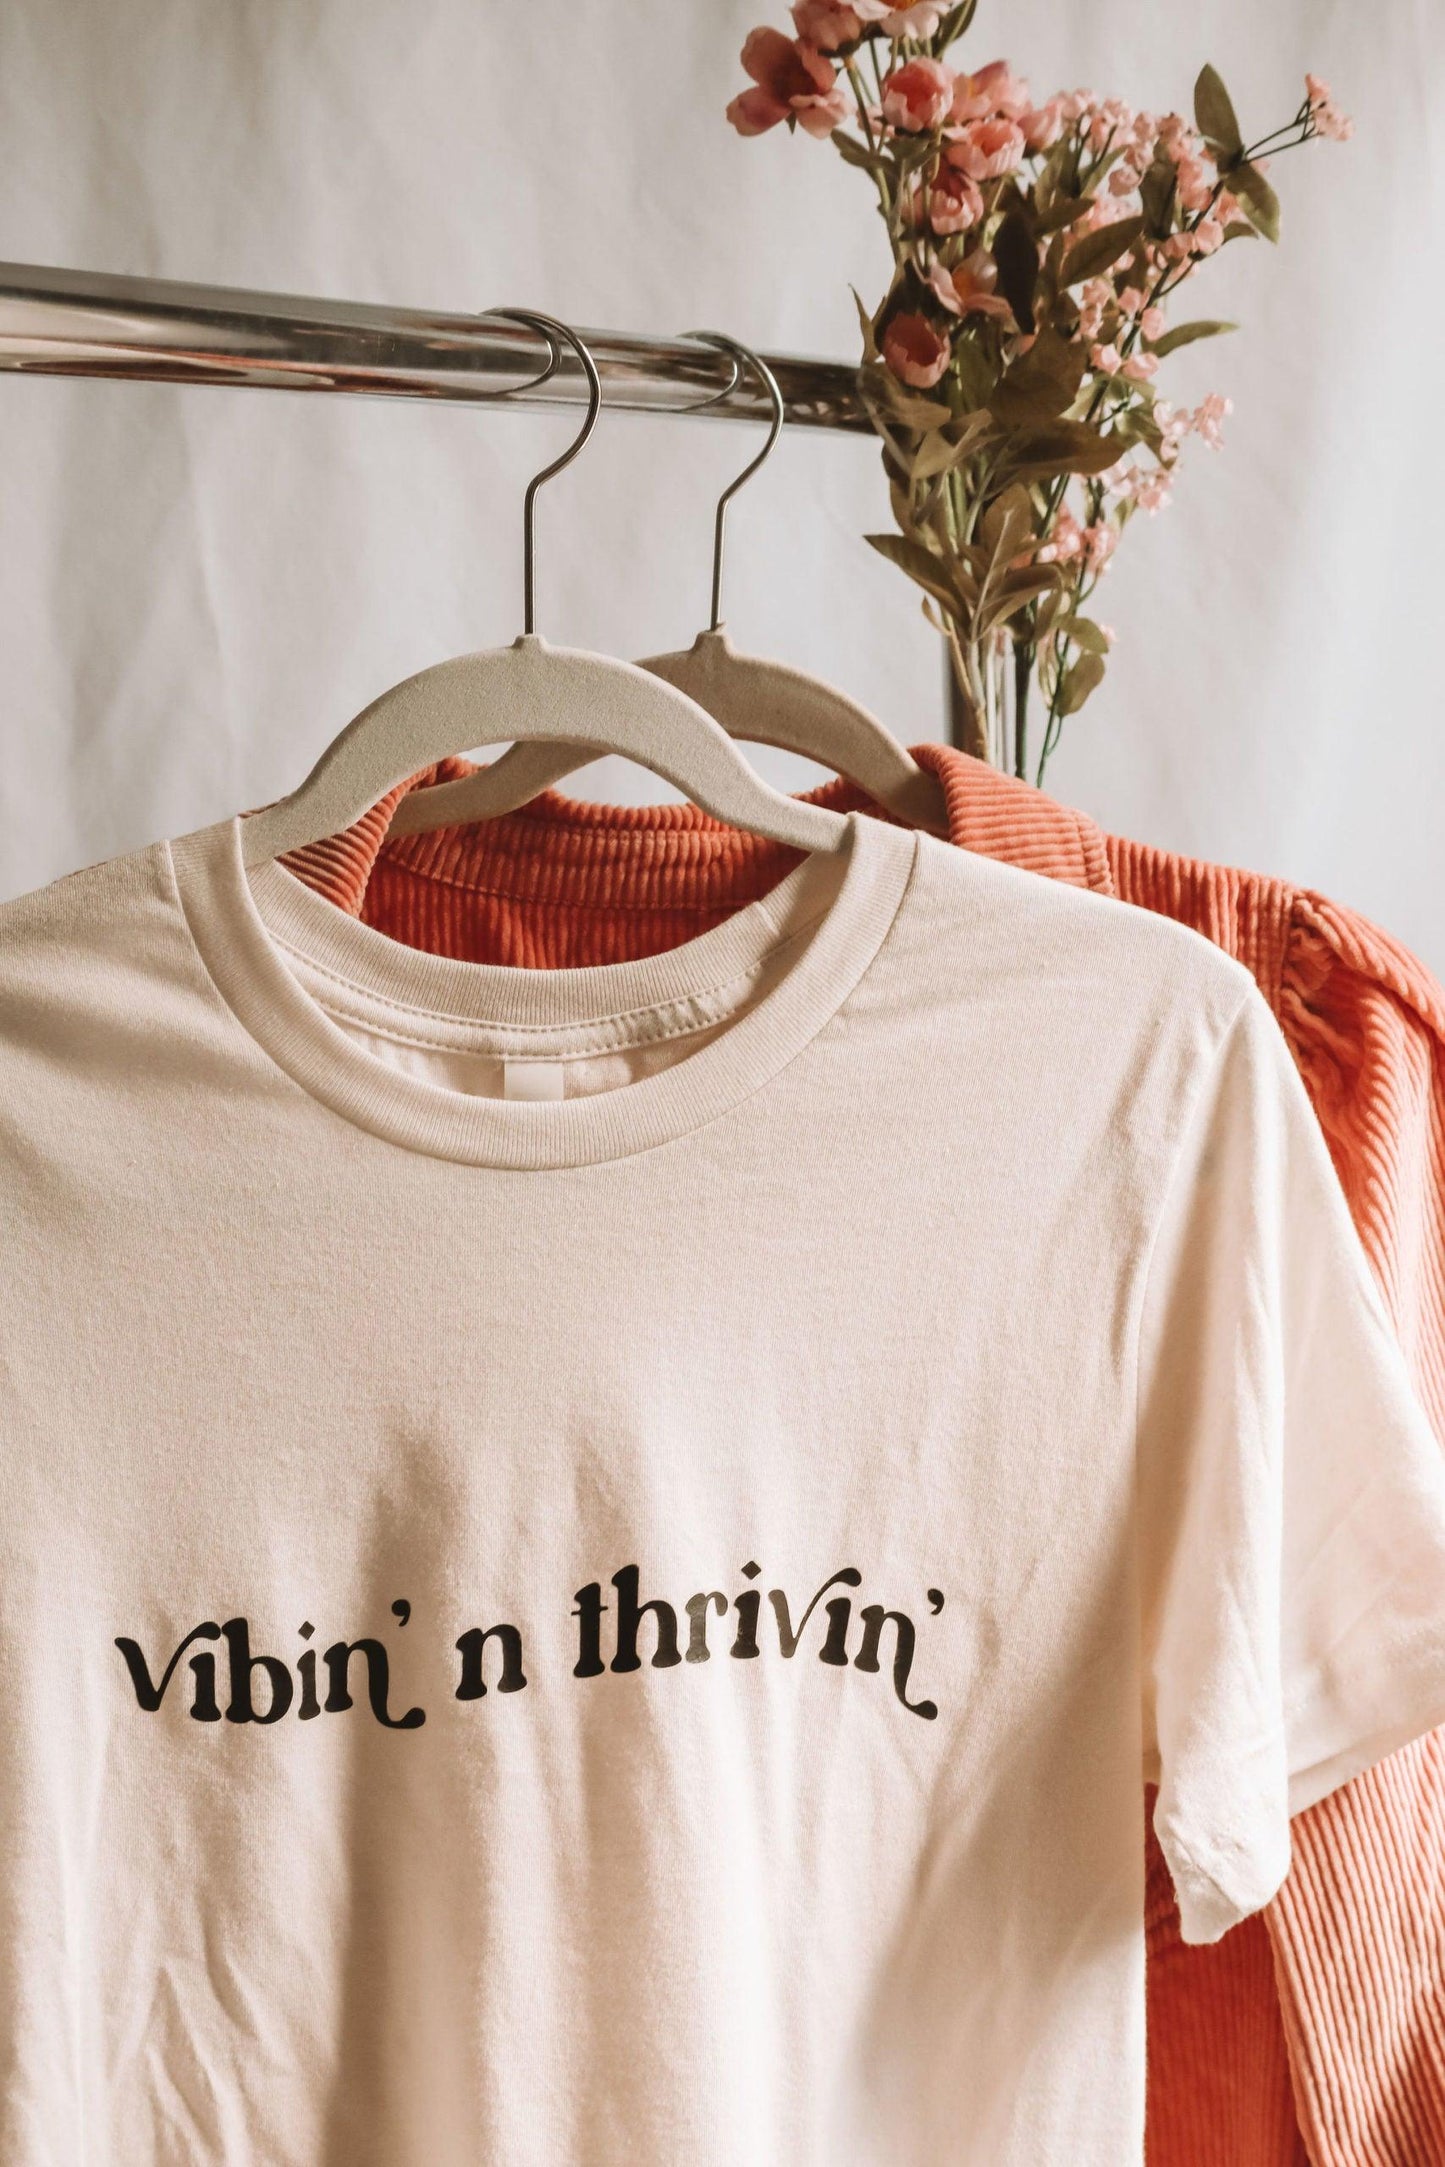 a closer cropped photo of a white shirt with "vibin' n thrivin'" written in wavy retro text hanging on a clothing rack in front of a pink corduroy button up shirt